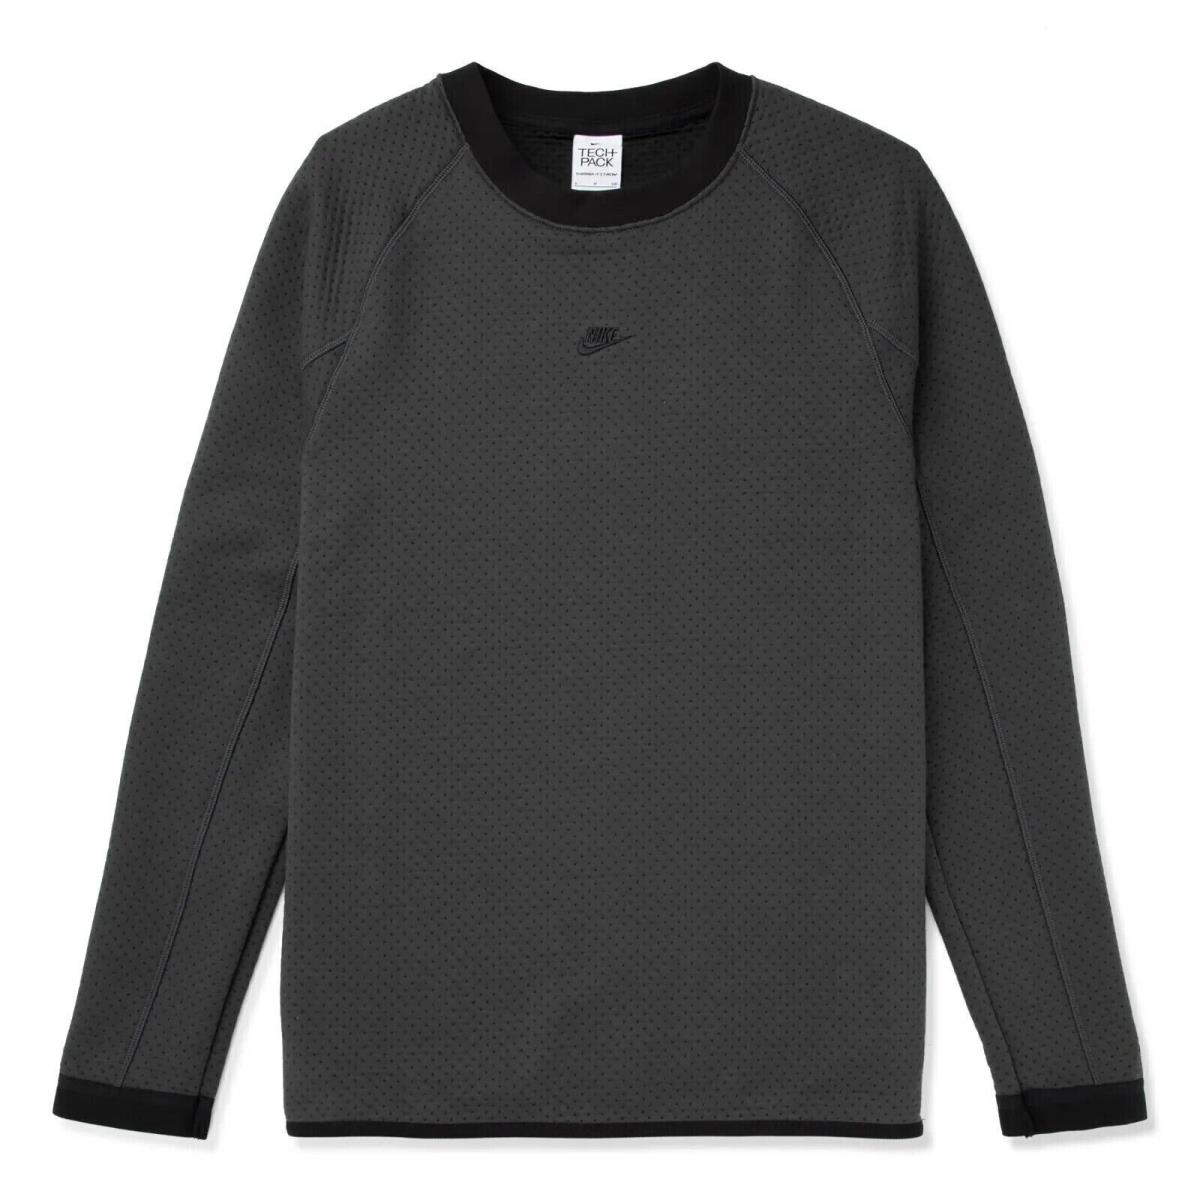 Nike Therma-fit Adv Tech Pack Sweatshirt DD6630-060 Anthracite Mens Small S